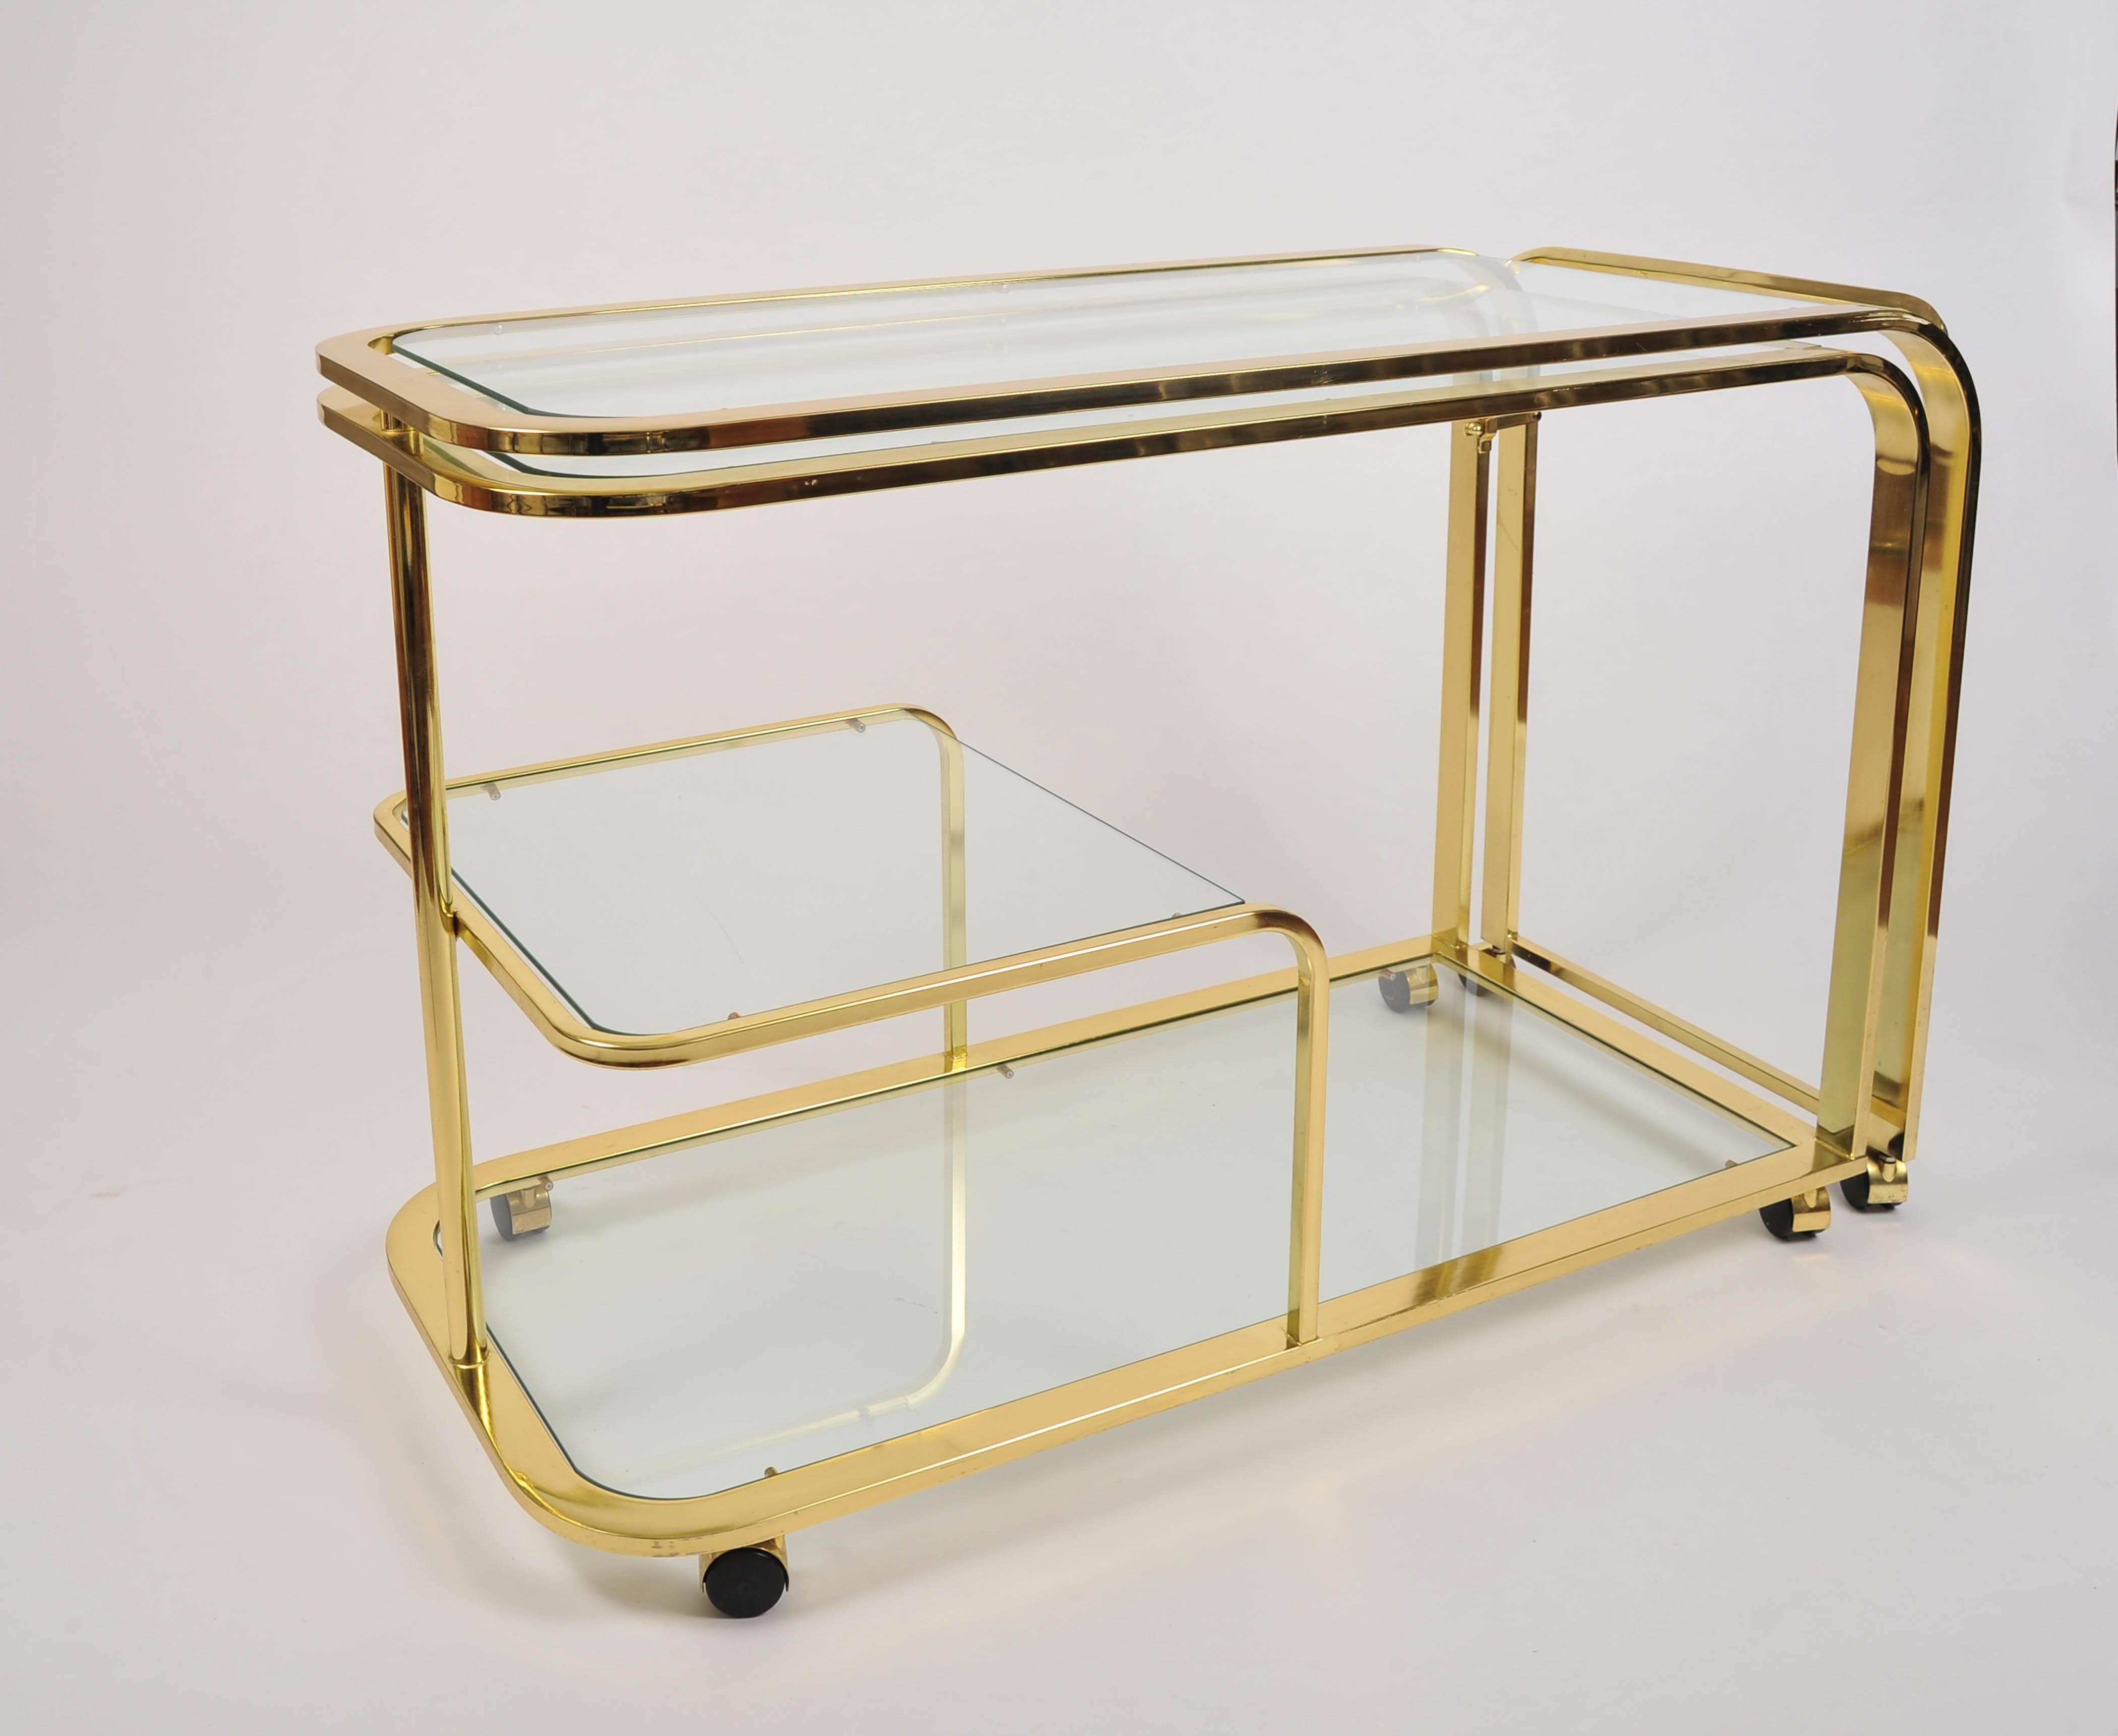 Versatile and chic large brass curved drinks/entertaining trolley which opens to double the length, giving a maximum of four glass shelves. Brass casters allow for easy movement.